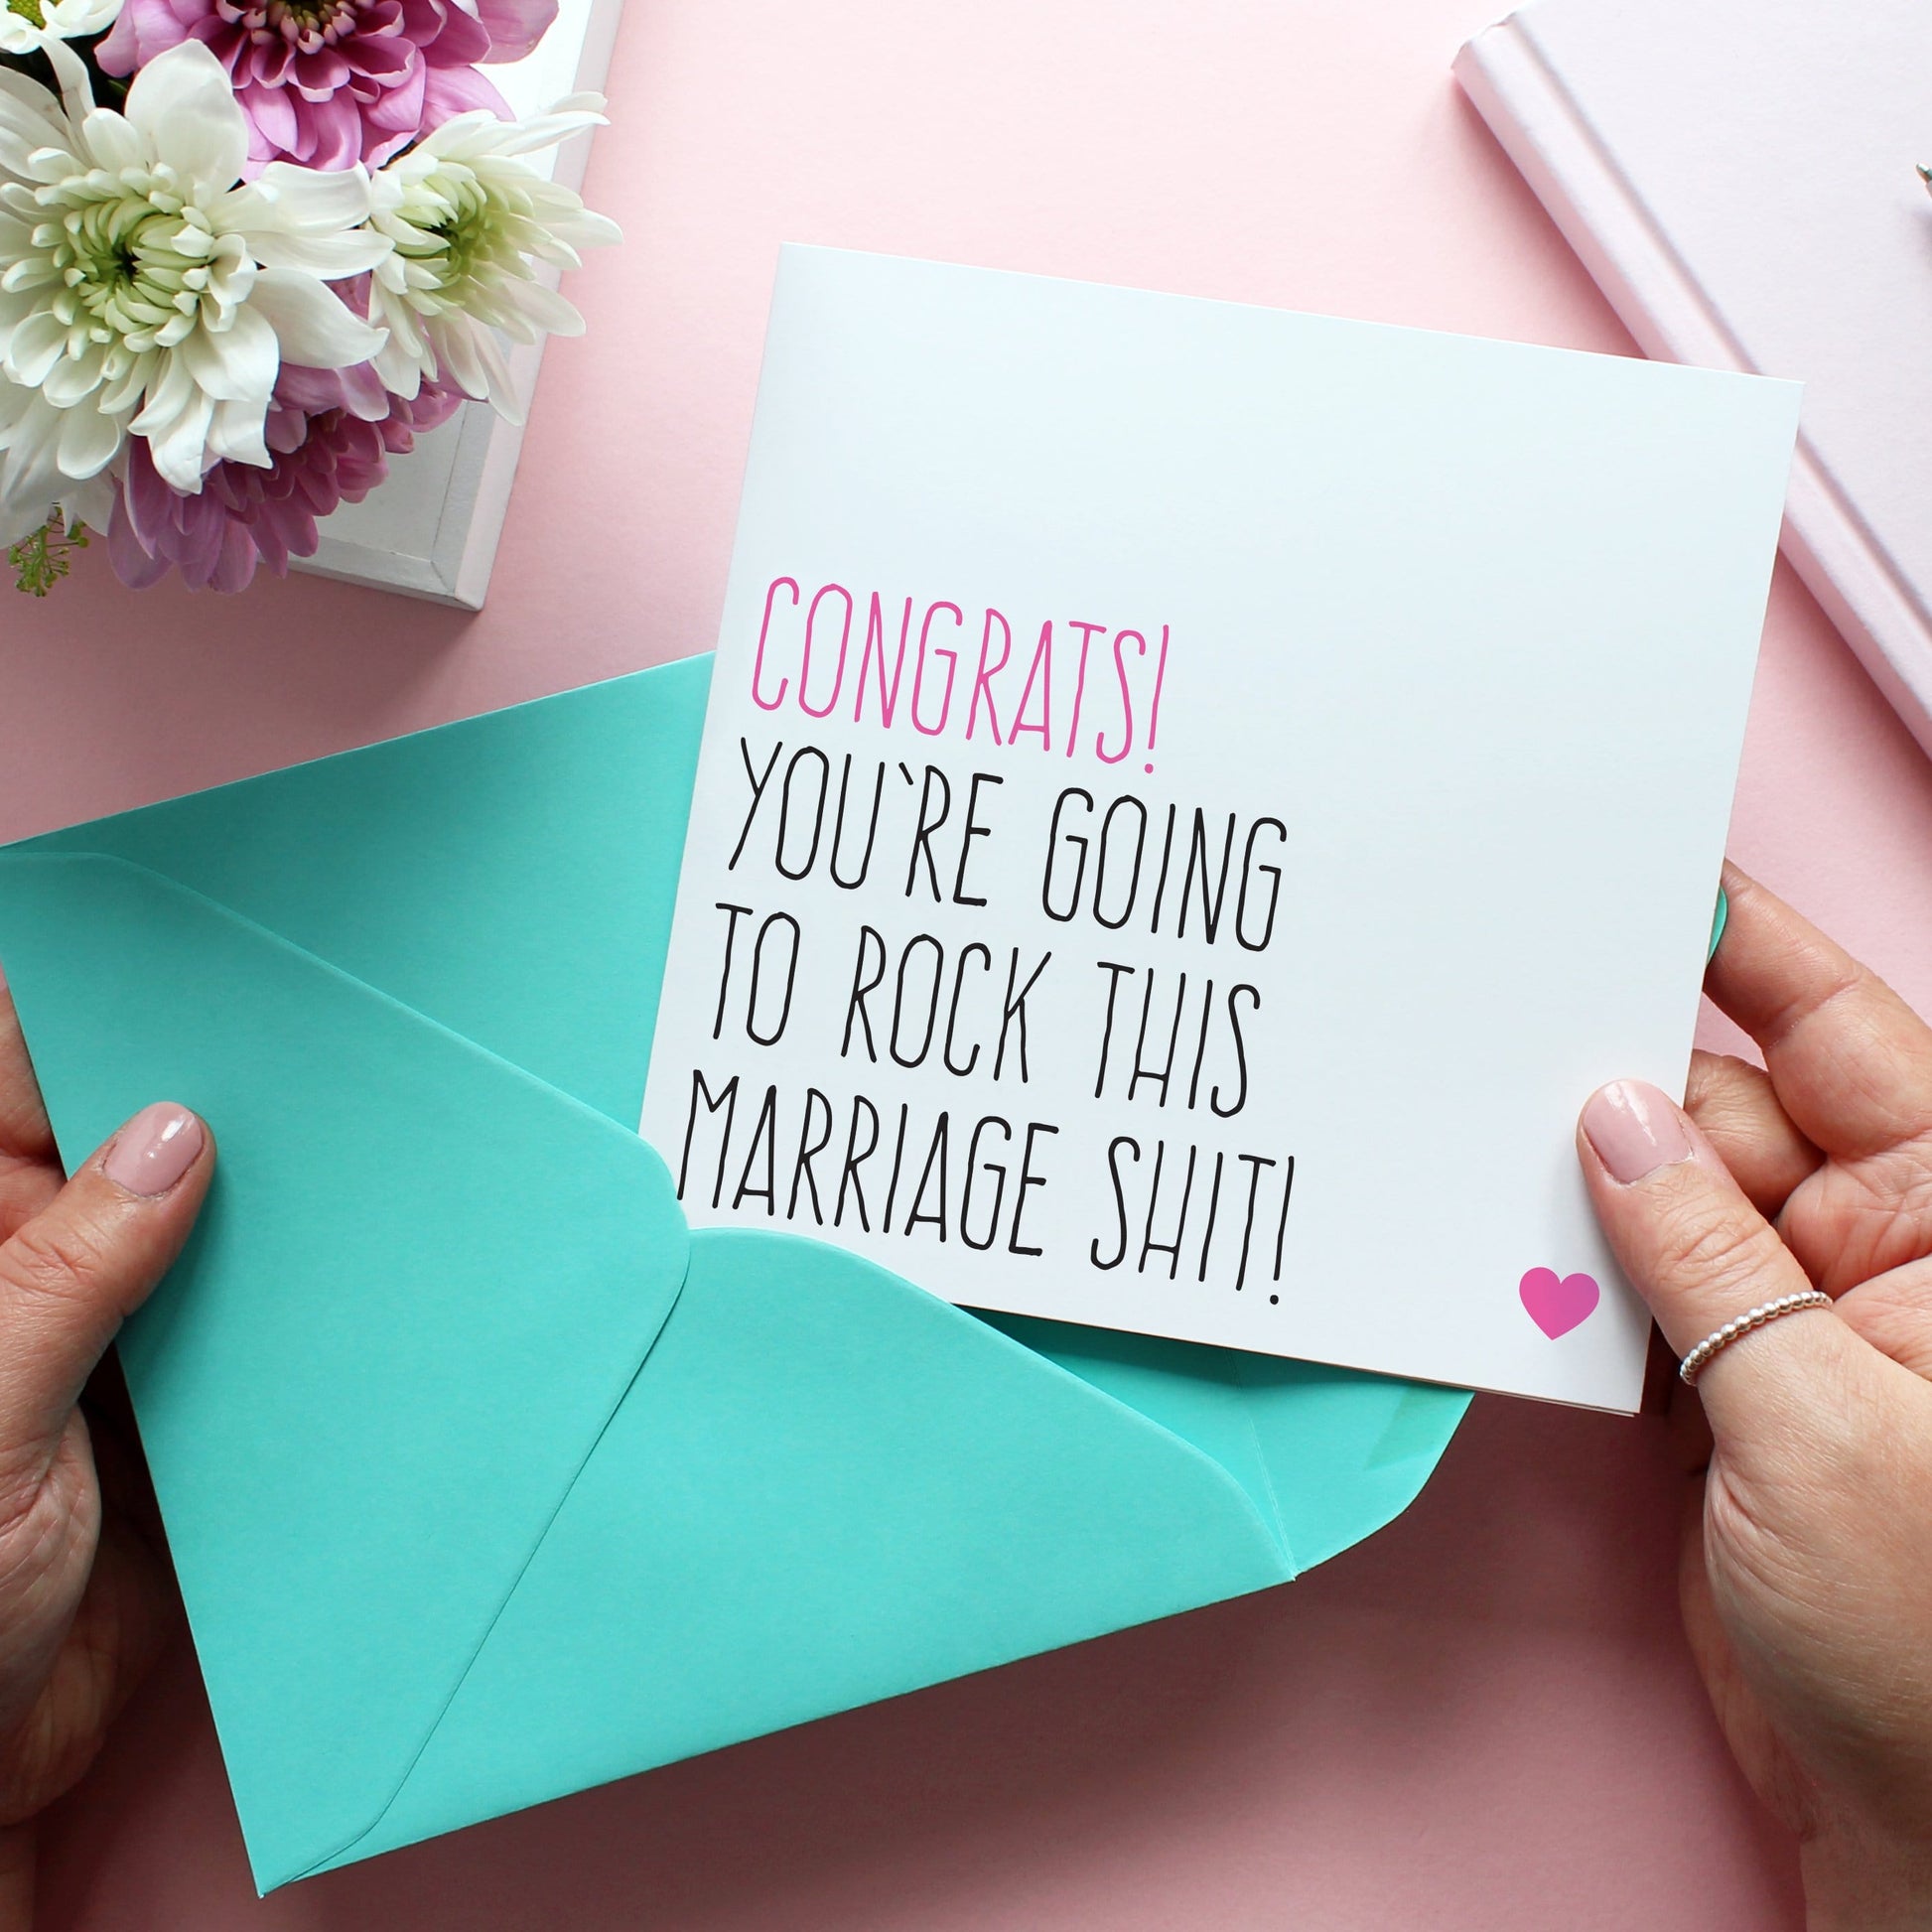 Rock this marriage shit greeting card from Purple Tree Designs